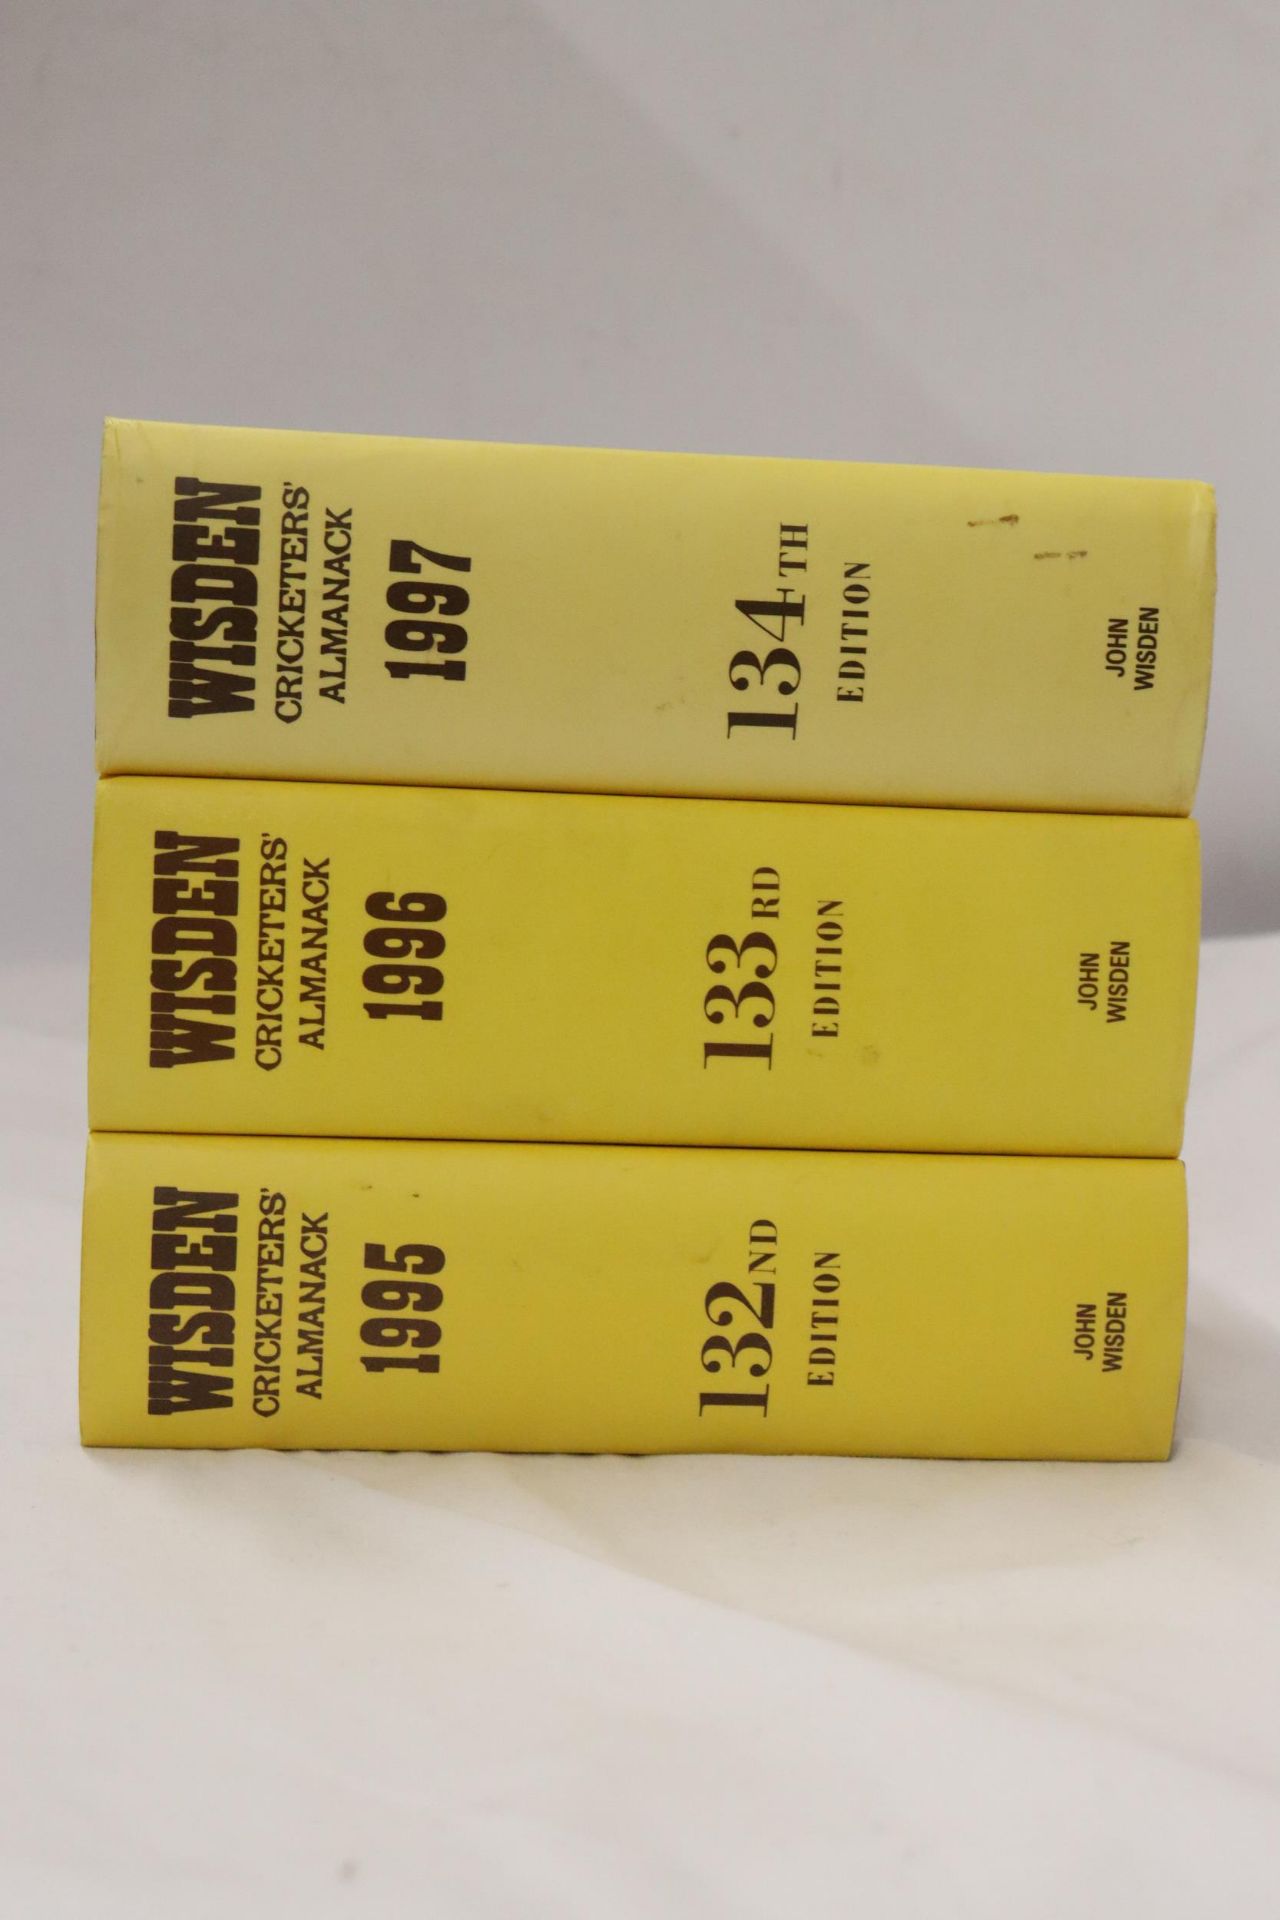 THREE HARDBACK COPIES OF WISDEN'S CRICKETER'S ALMANACKS, 1995, 1996 AND 1997. THESE COPIES ARE IN - Image 3 of 3